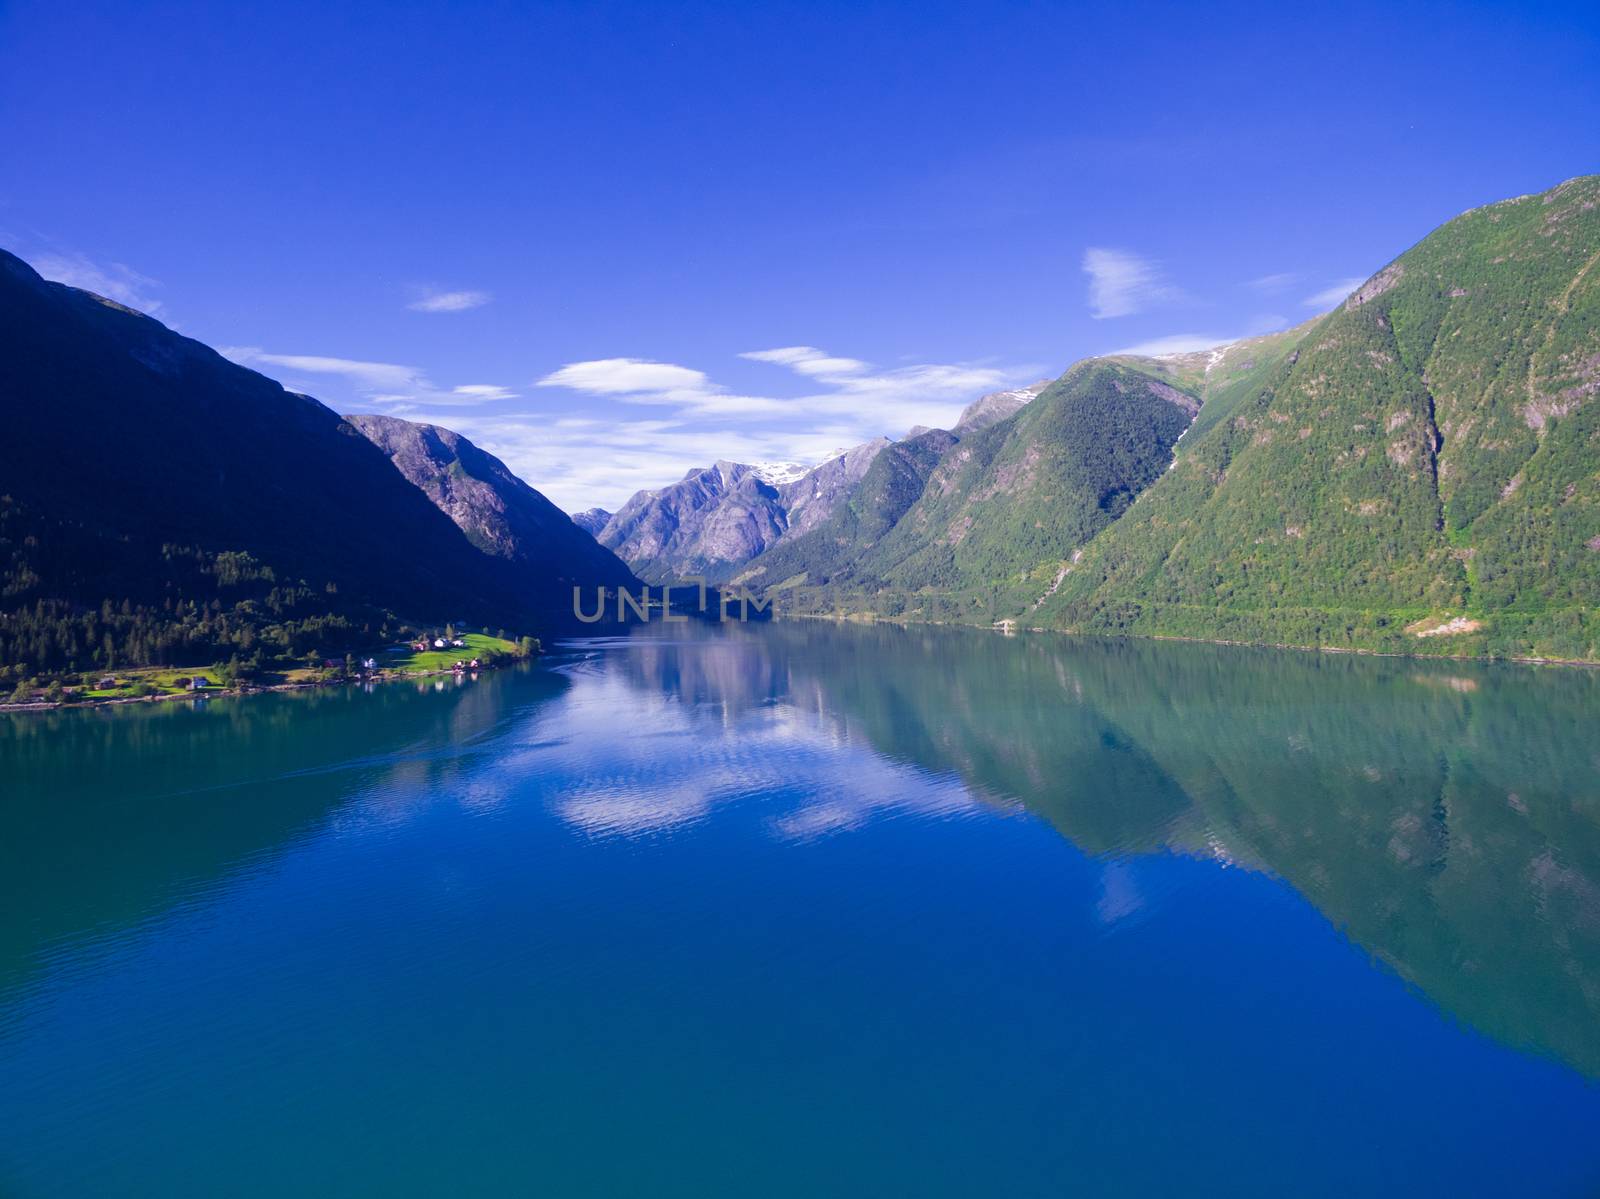 Norway by Harvepino